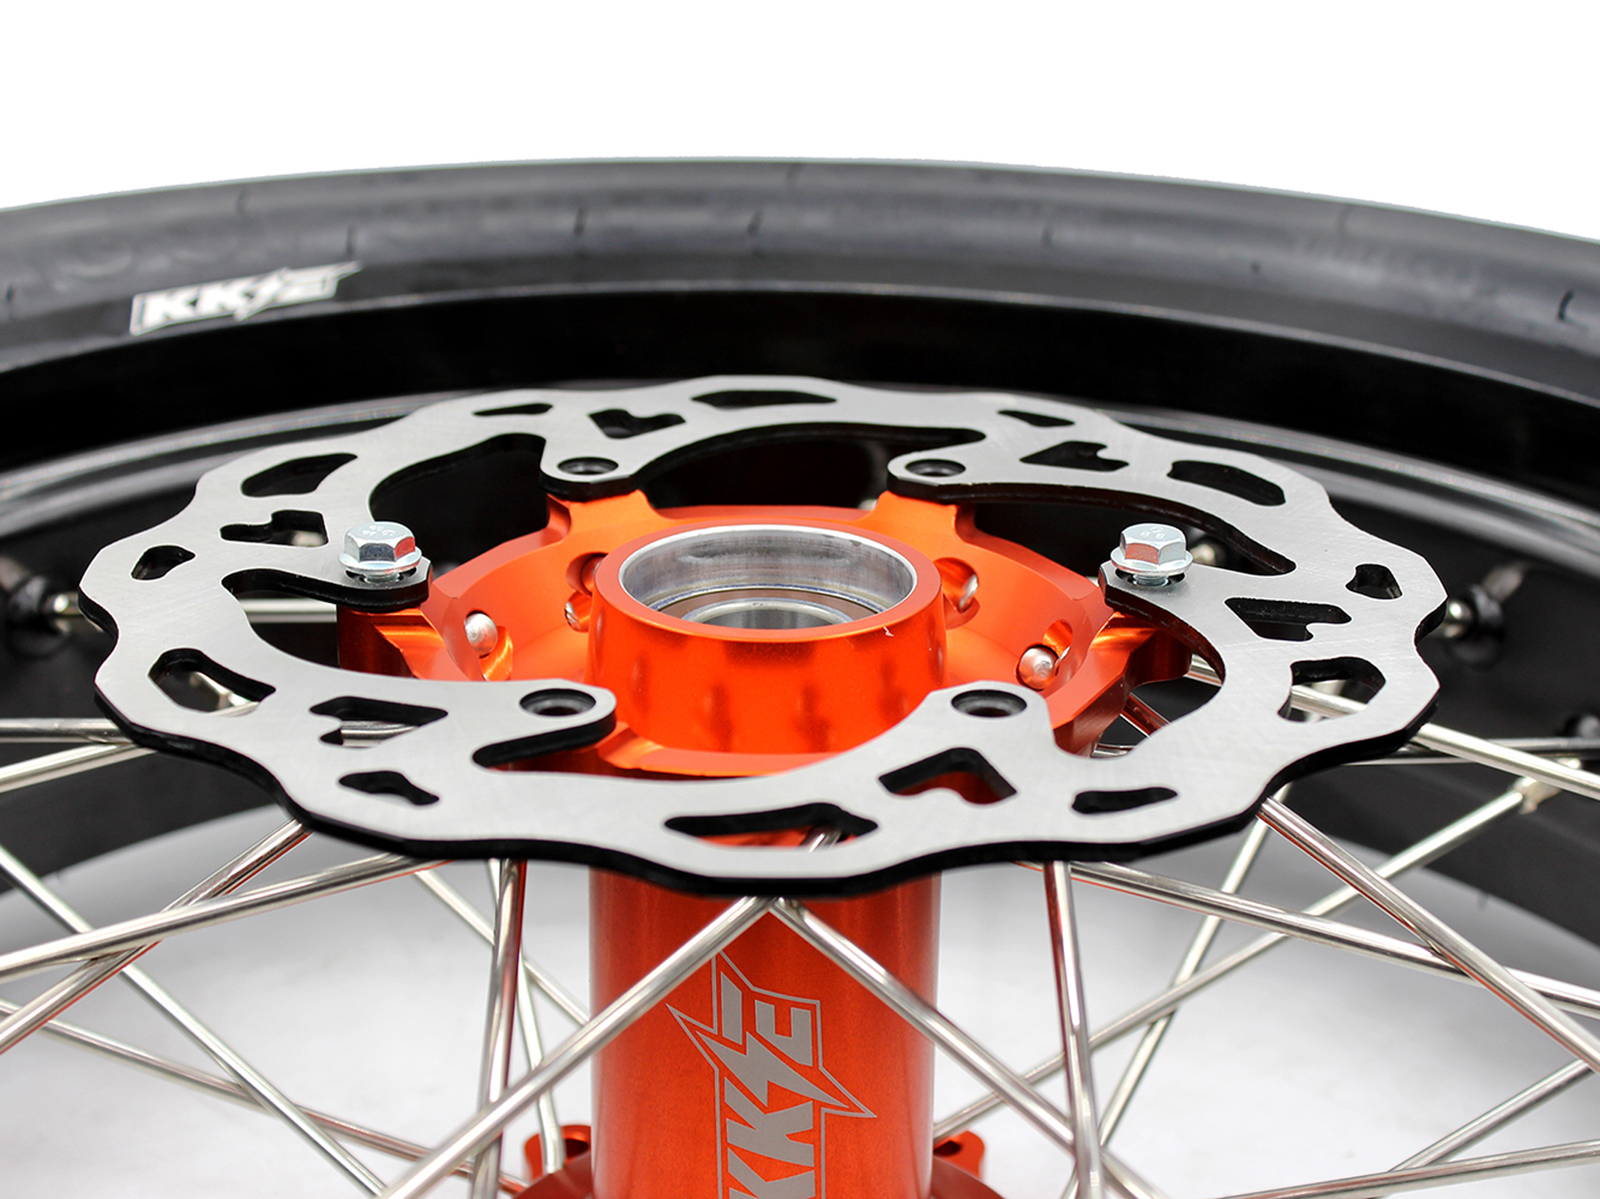 KKE 3.5/4.25 Motorcycle Supermoto Wheels With CST Tire Fit KTM EXC